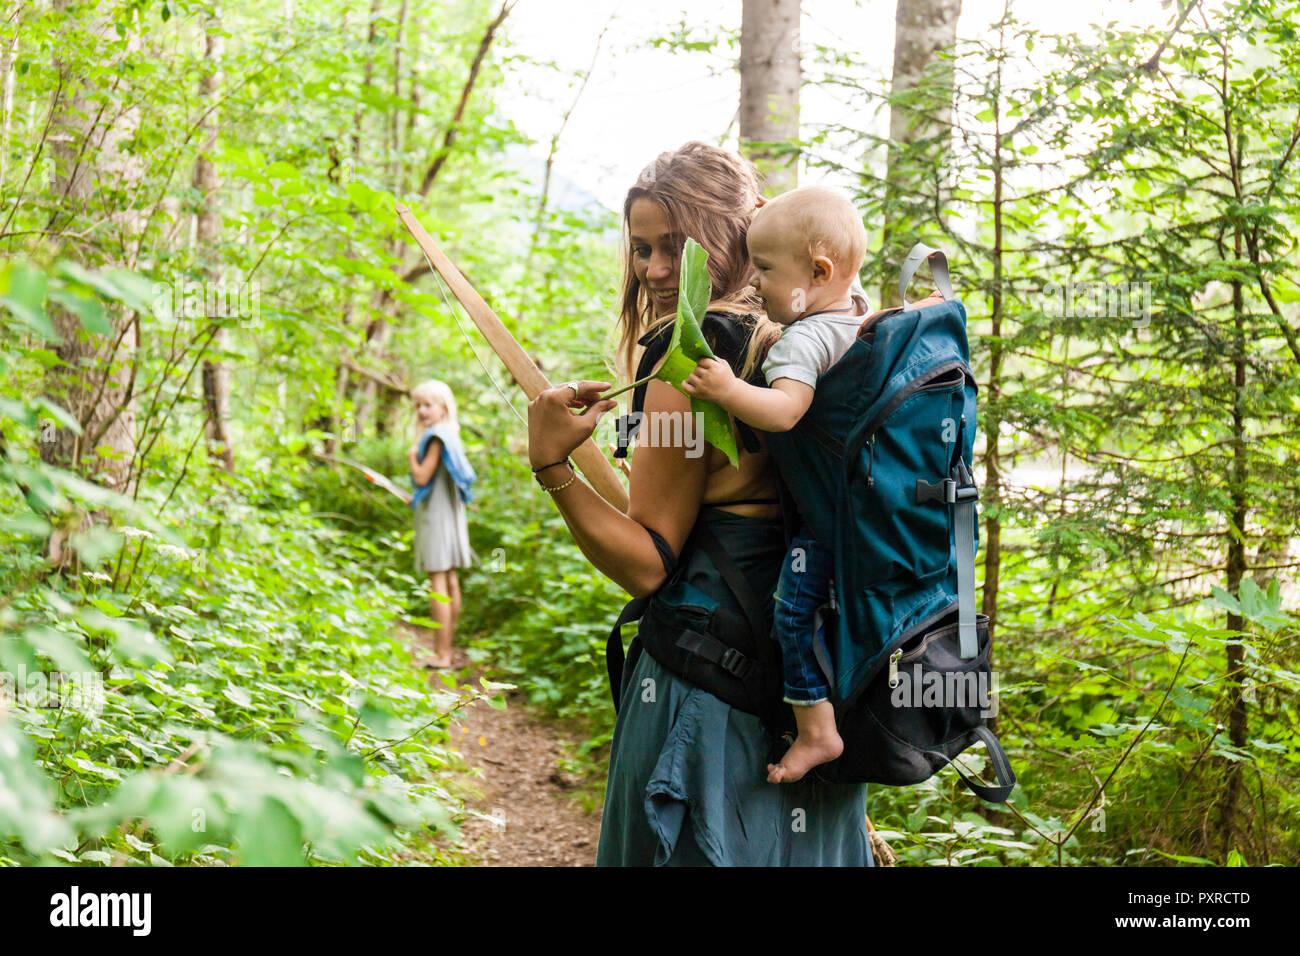 Woman hiking in the woods showing large leaf to baby boy in backpack Stock Photo